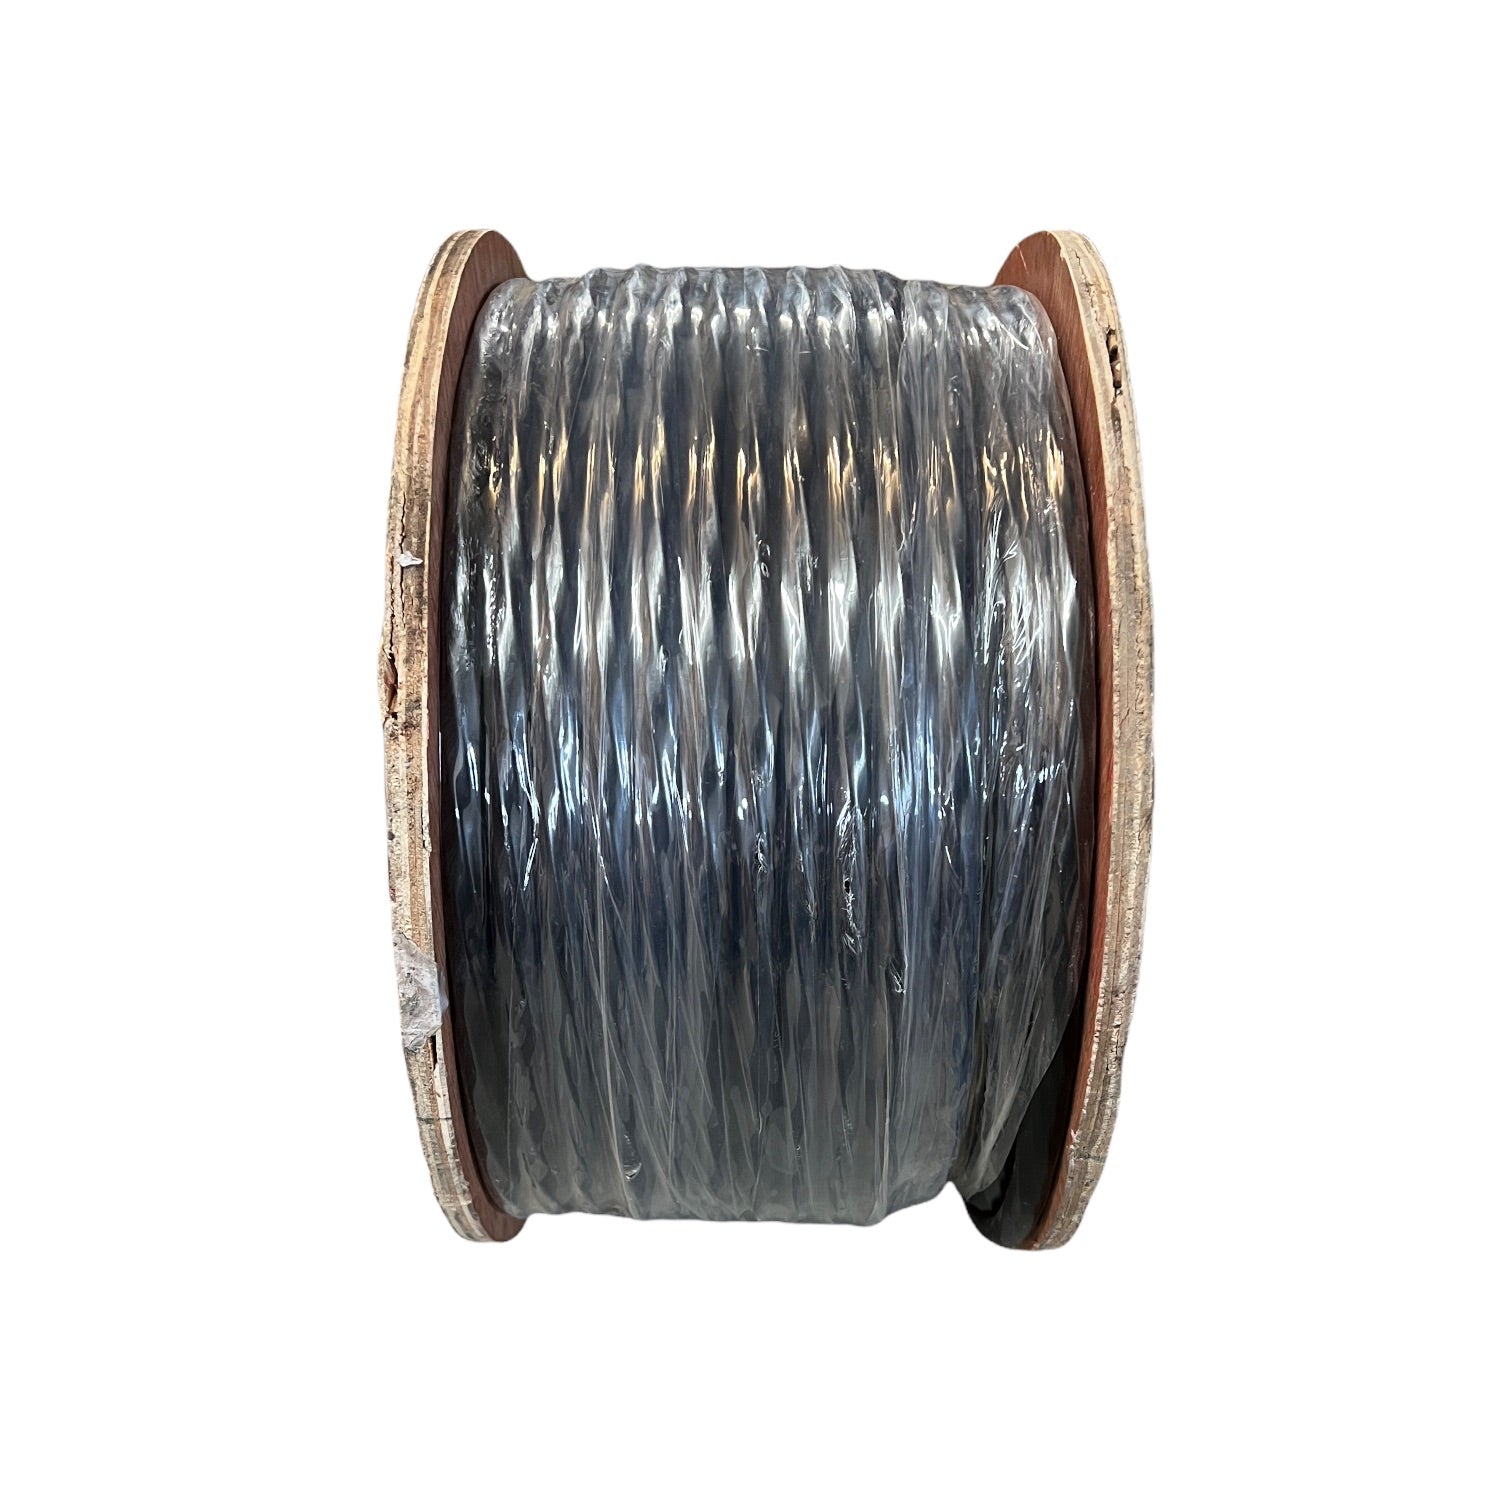 18/4X1000 - Multi-Conductor Irrigation Control Wire, 18 awg, 18/4 X 1000 ft